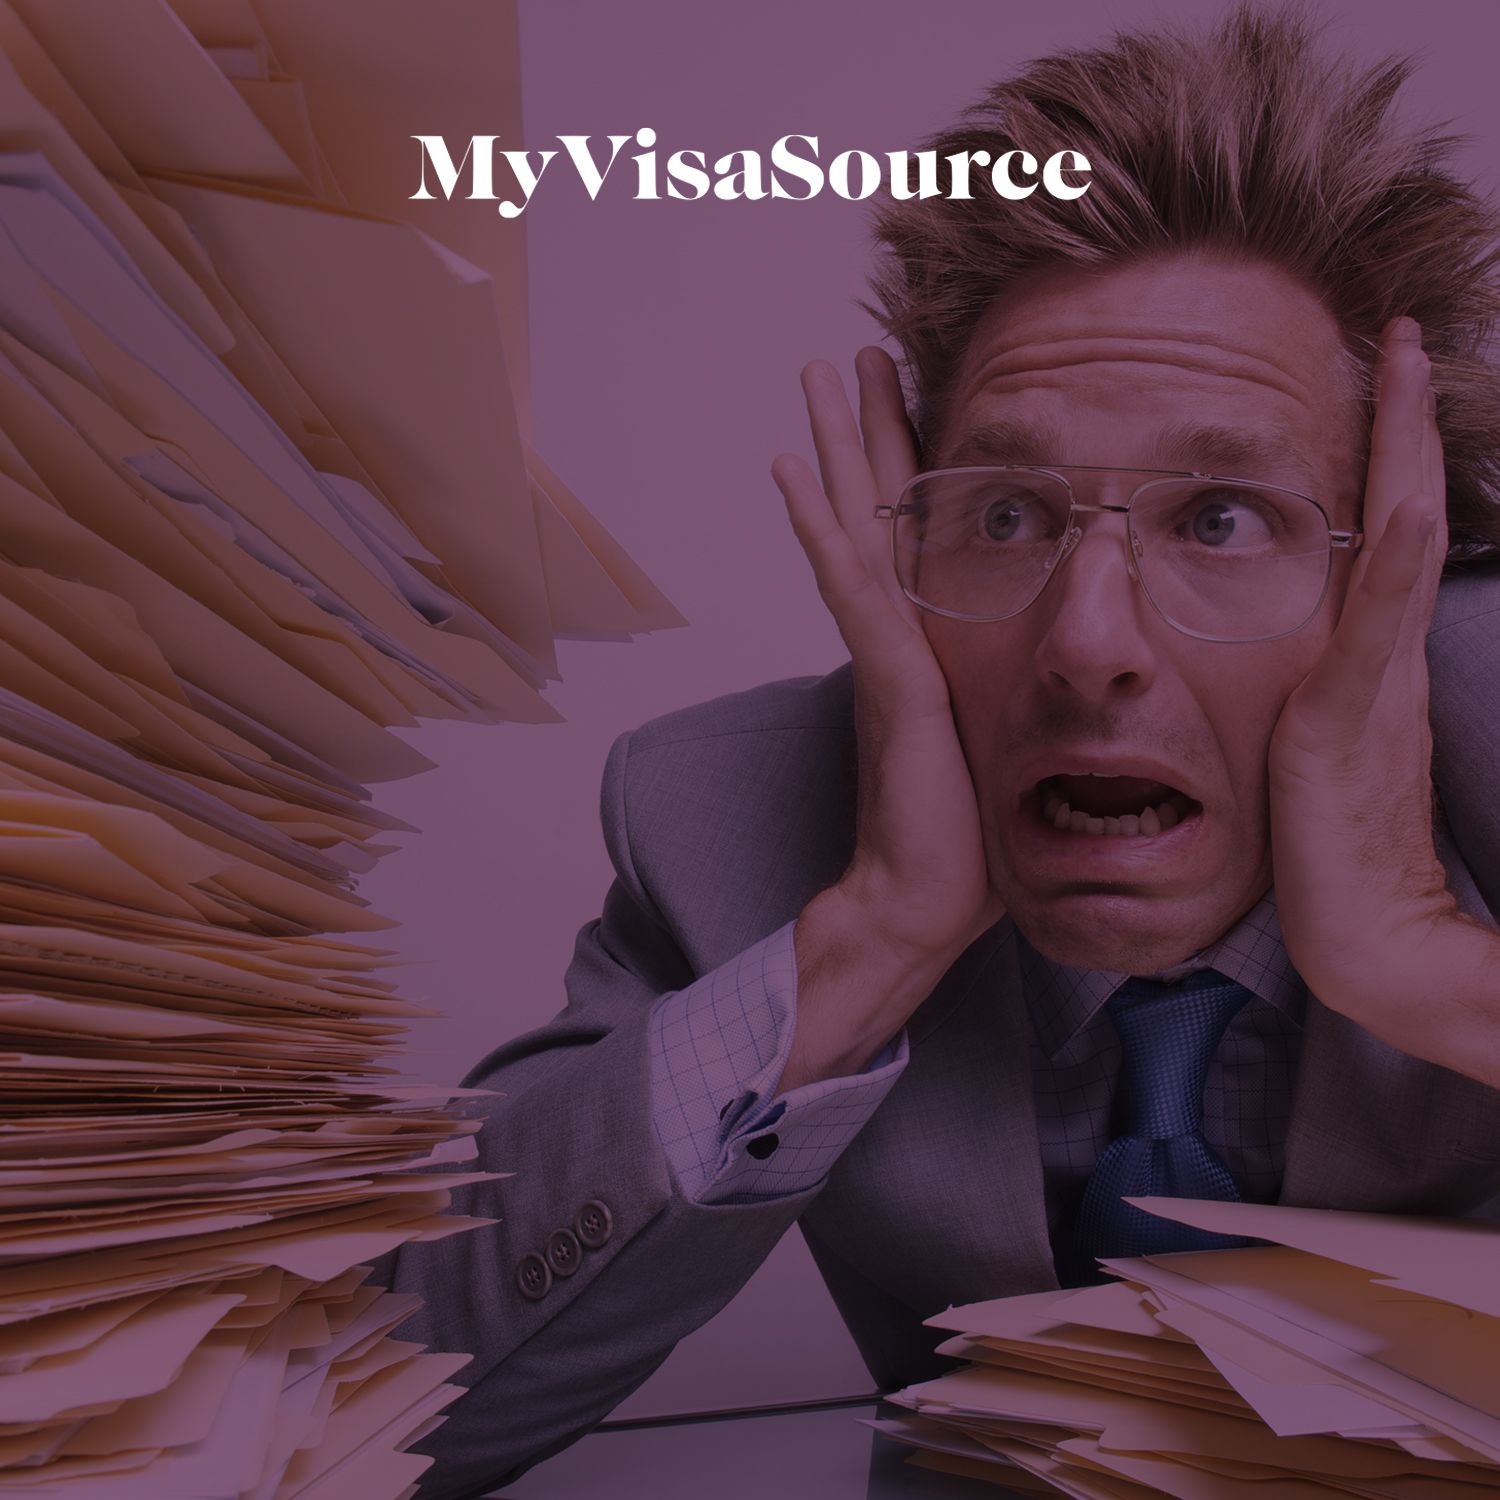 stressed out professional with a massive pile of files my visa source